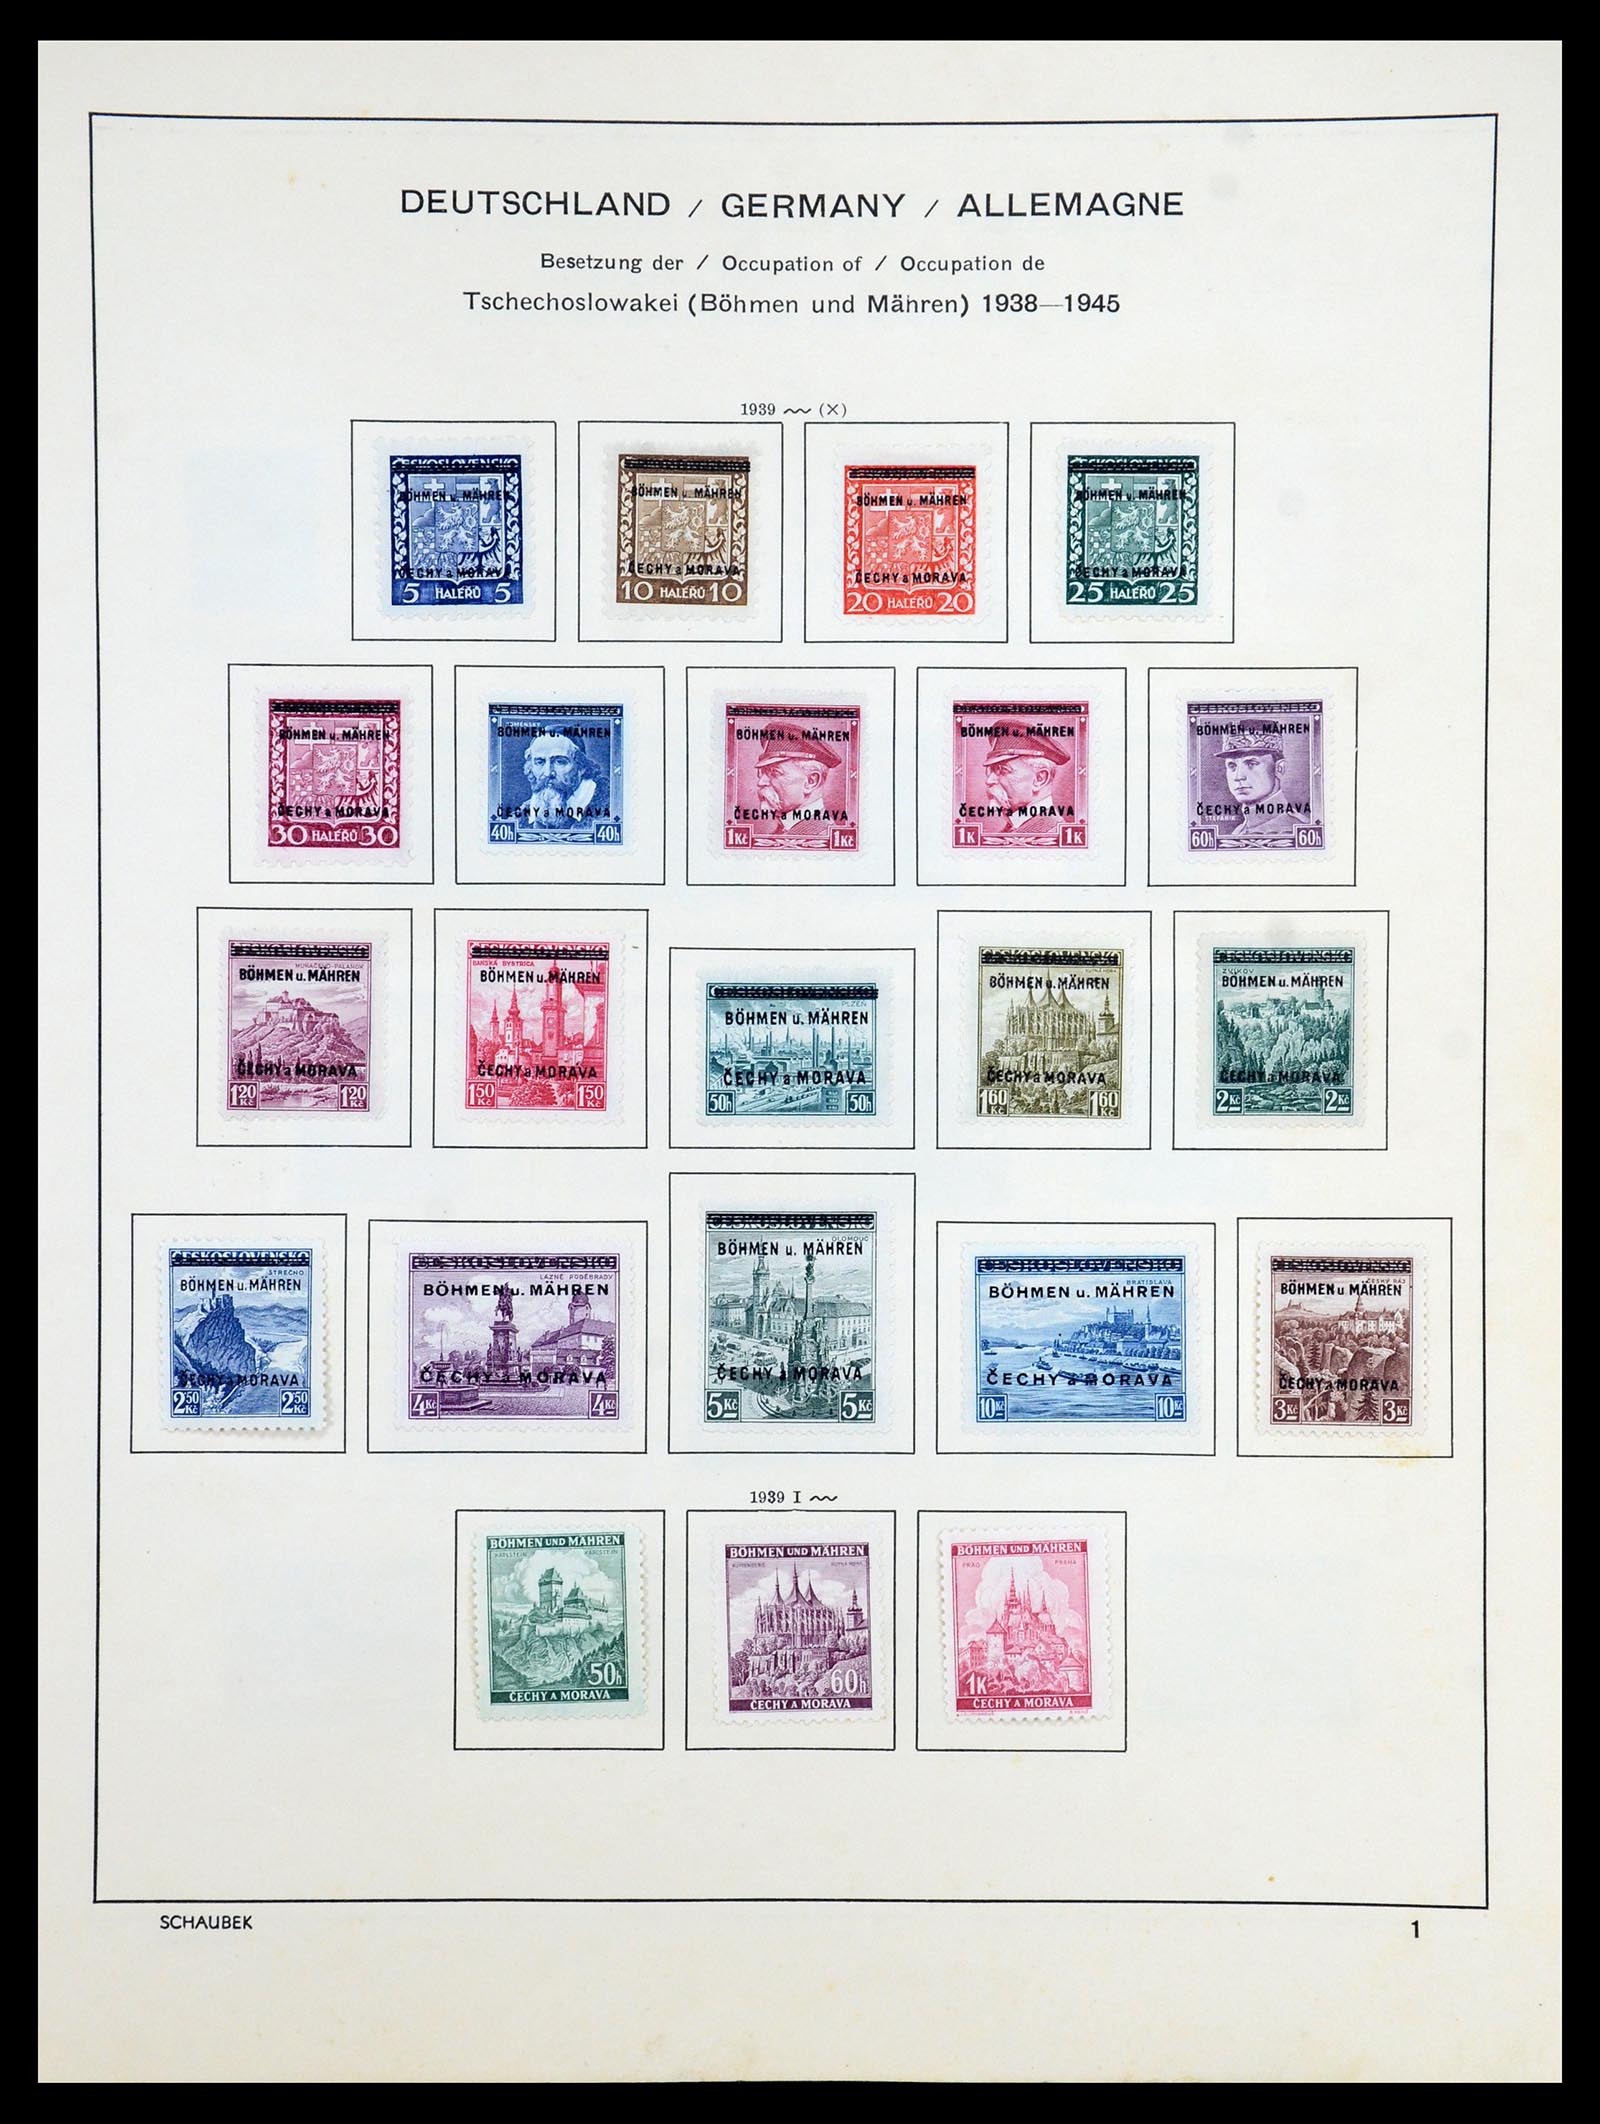 35964 021 - Stamp collection 35964 Germany occupations WW II 1939-1945.